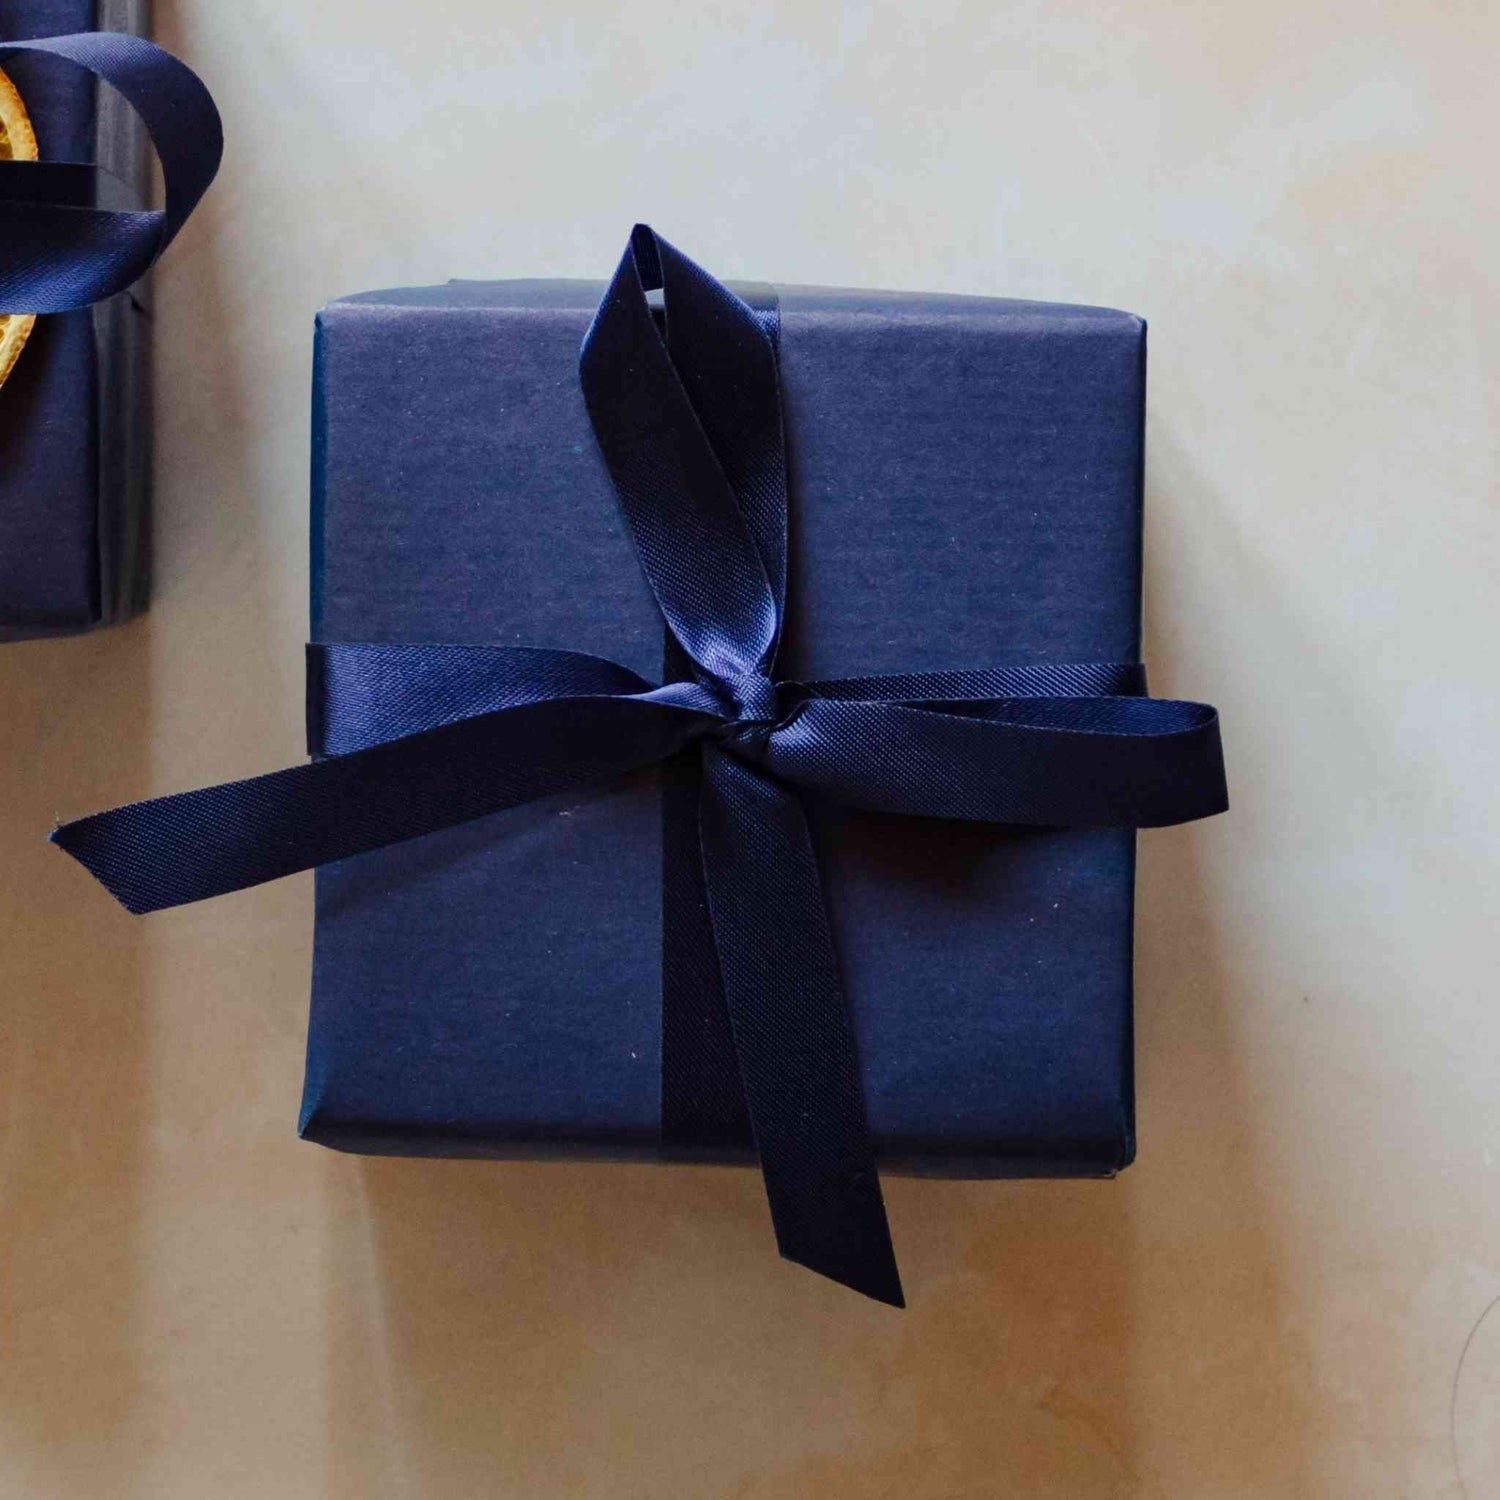 A 200g linen scented soy candle from the Home County Co. is shown with luxury Gift Wrap. The candle is wrapped in luxury navy wrapping paper secured with navy ribbon.